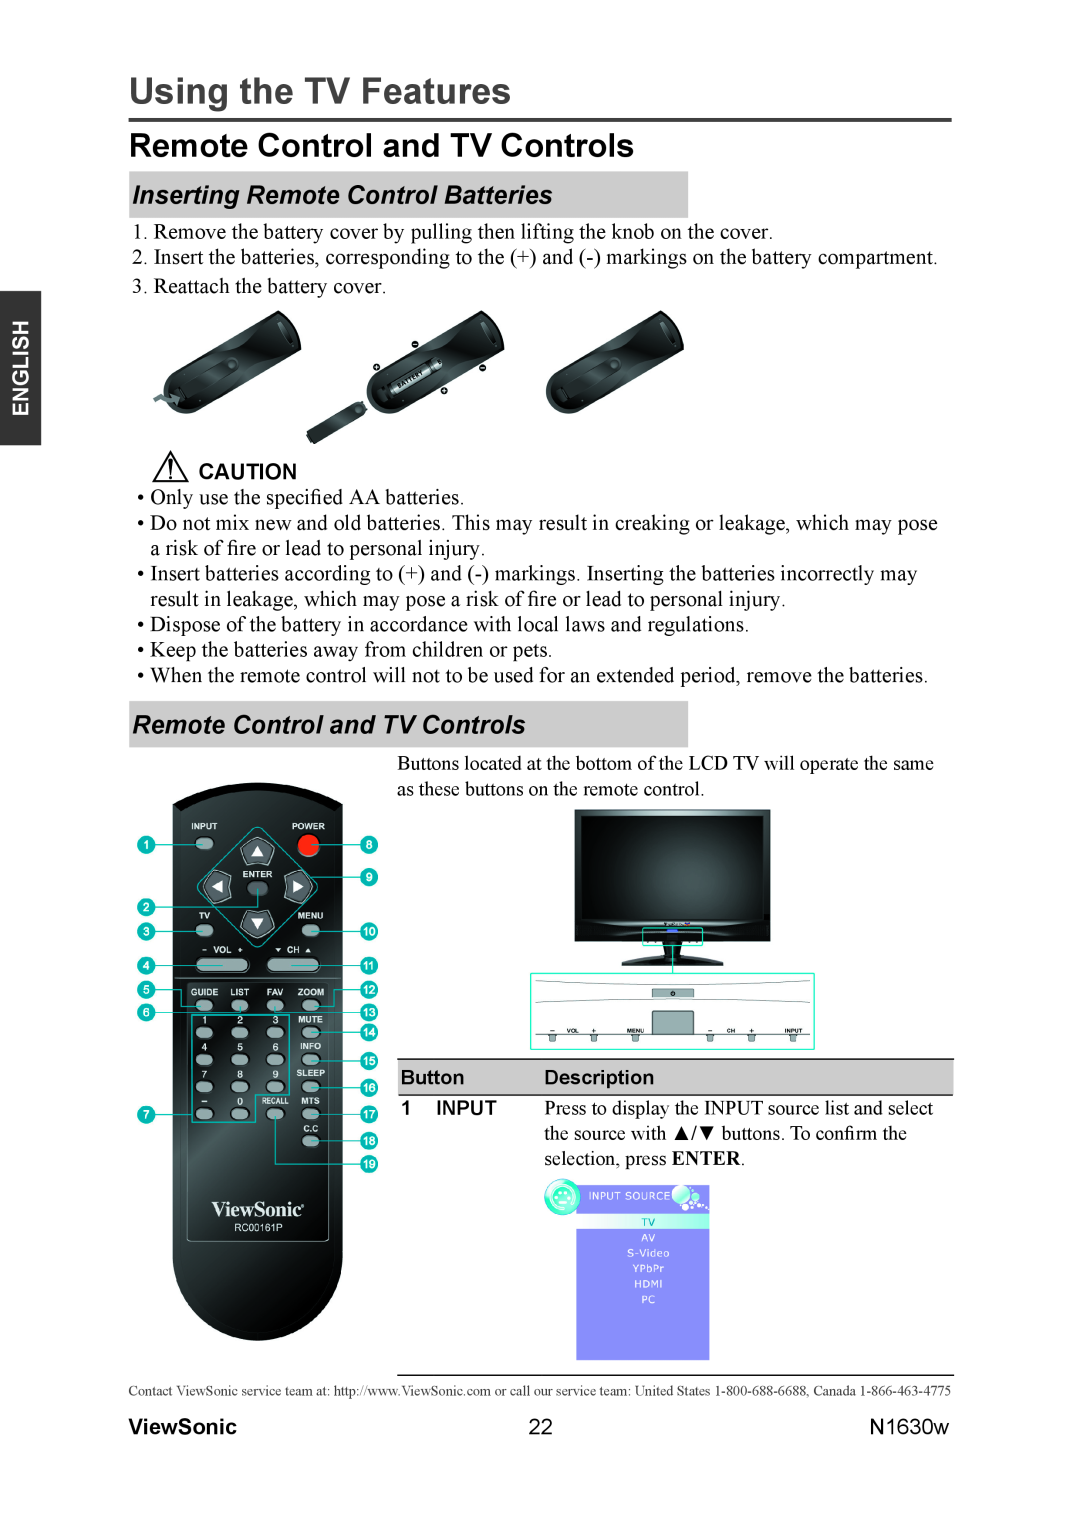 ViewSonic VS12114-1M Using the TV Features, Remote Control and TV Controls, Inserting Remote Control Batteries, English 